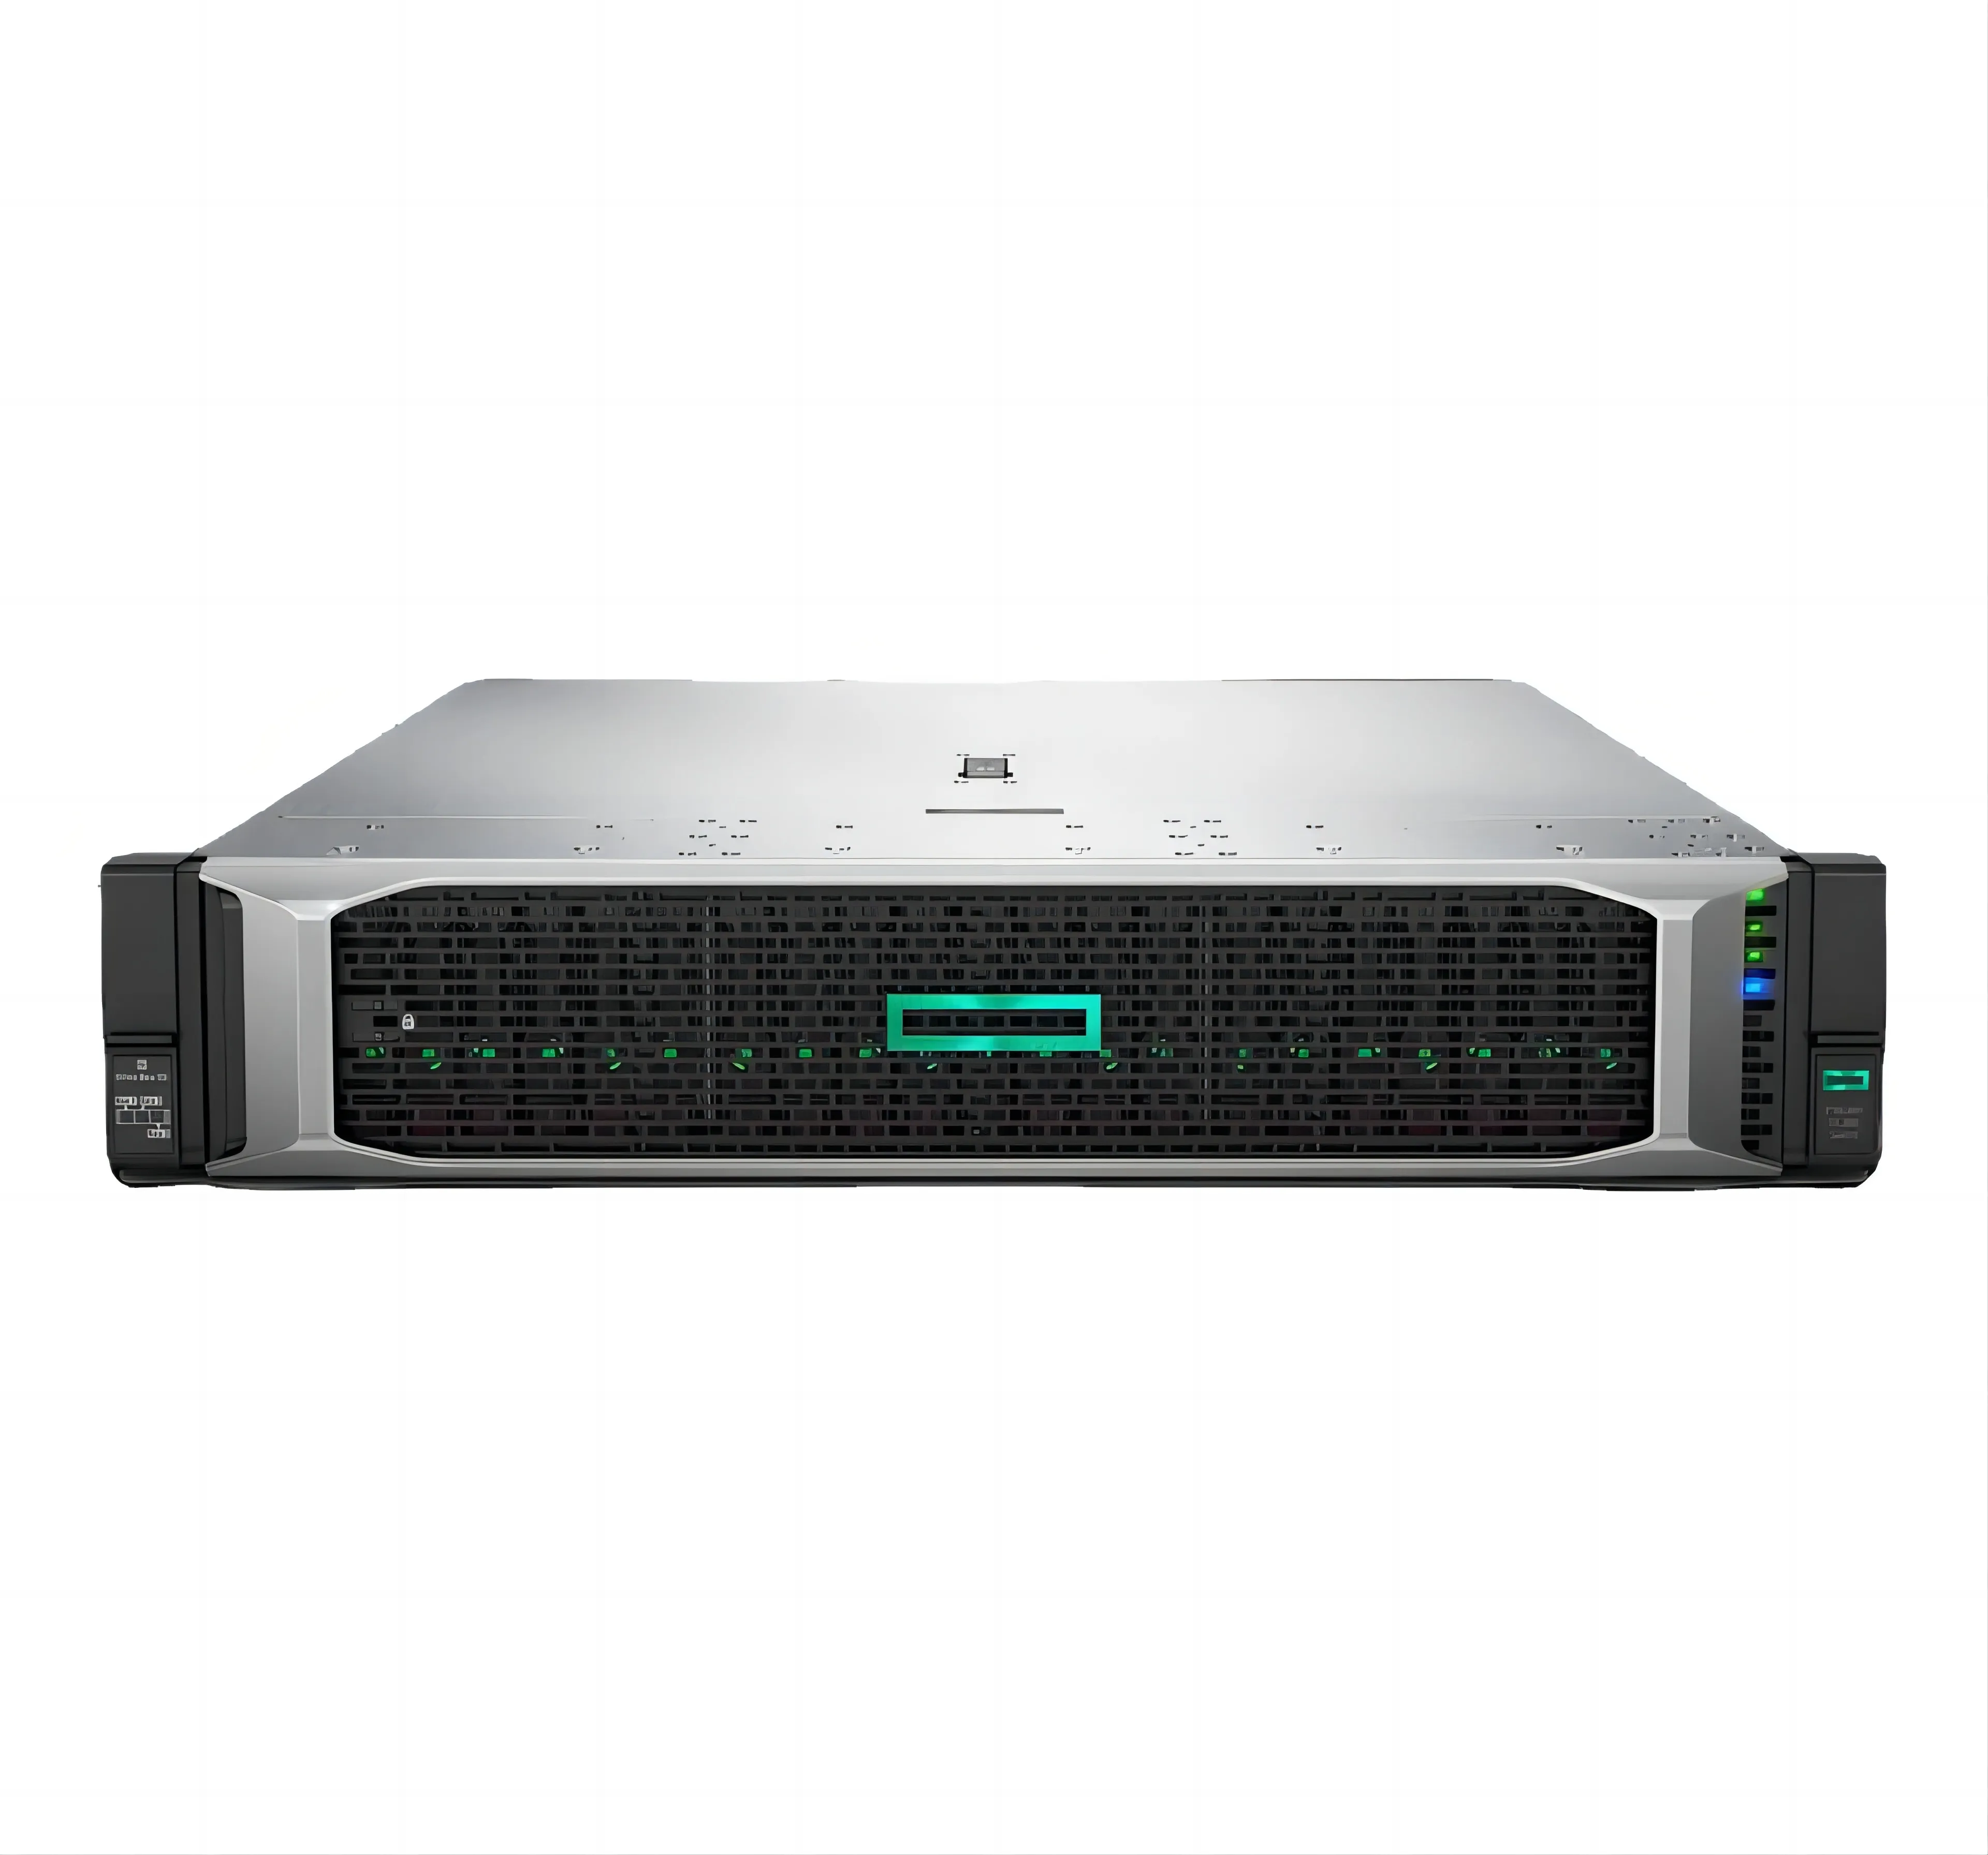 P56959-B21 ProLiant DL380 Gen10 4208 2.1GHz 8-core 1 P 32GB-R MR416i-a 8SFF BC 800W PS HPE Server pour HPE